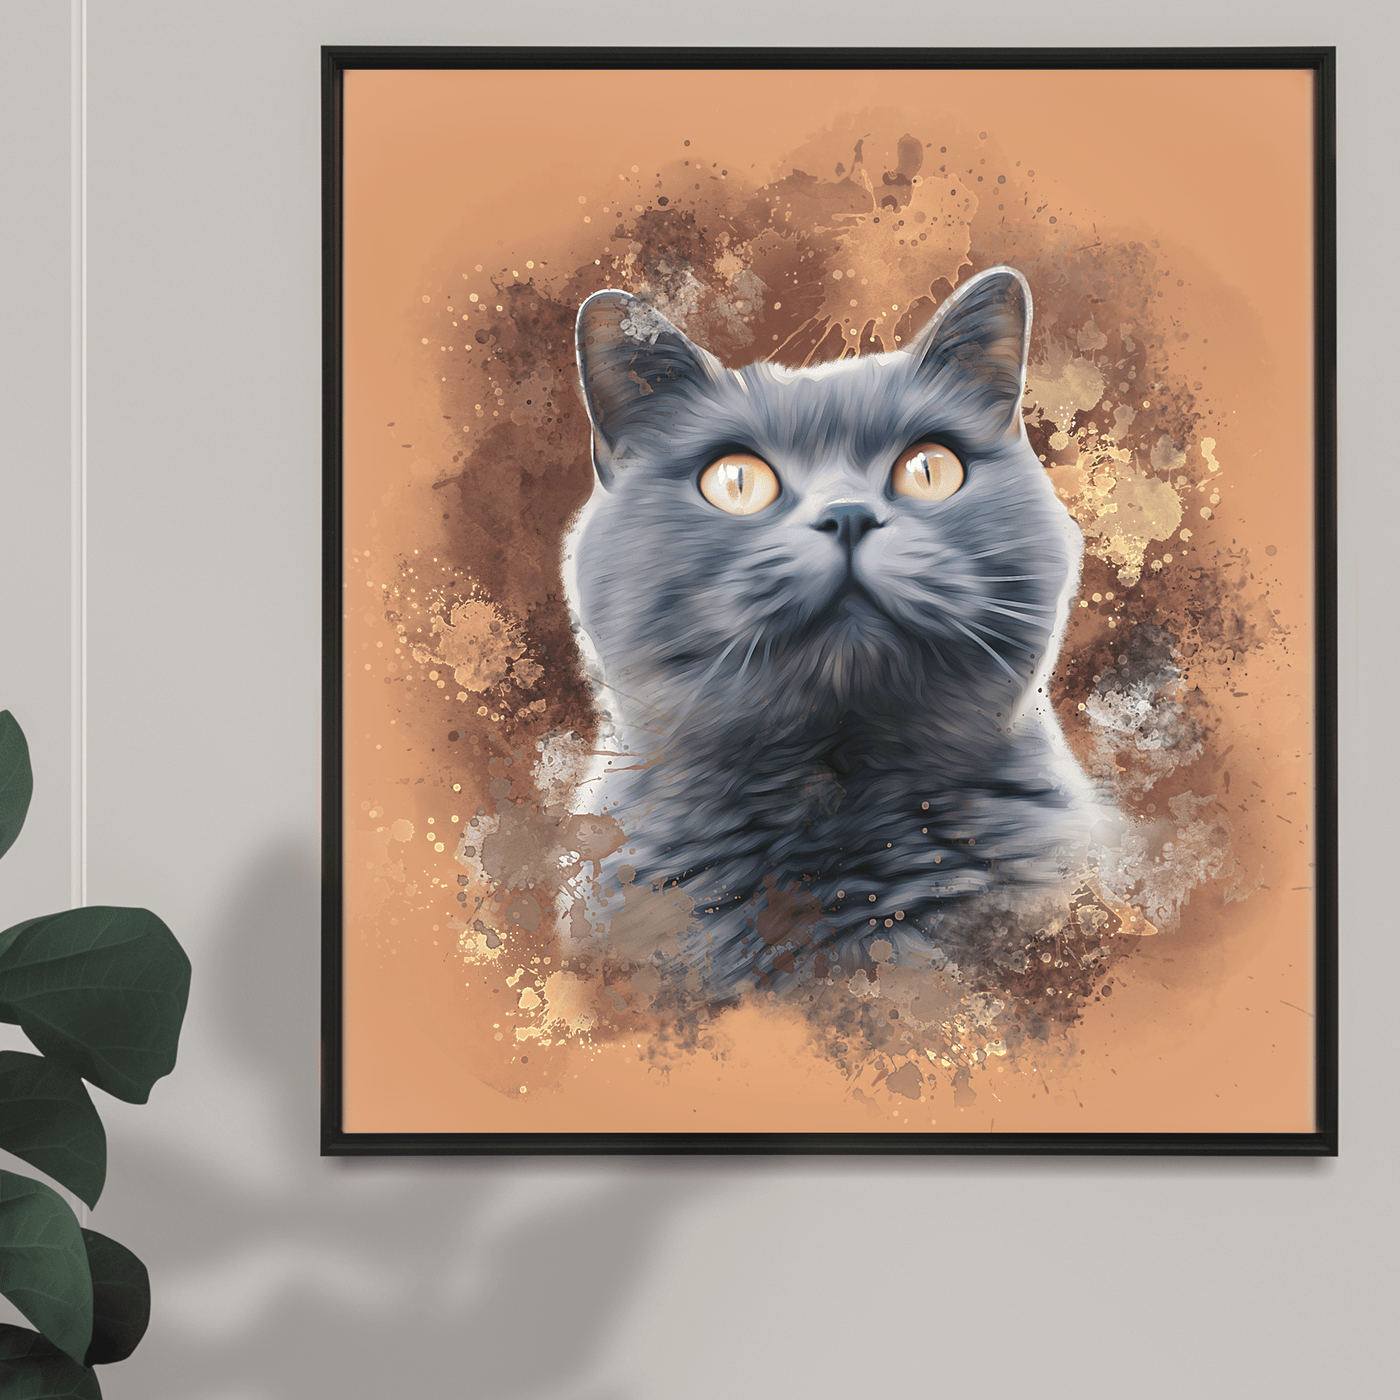 cat paintings on canvas of a black fur cat